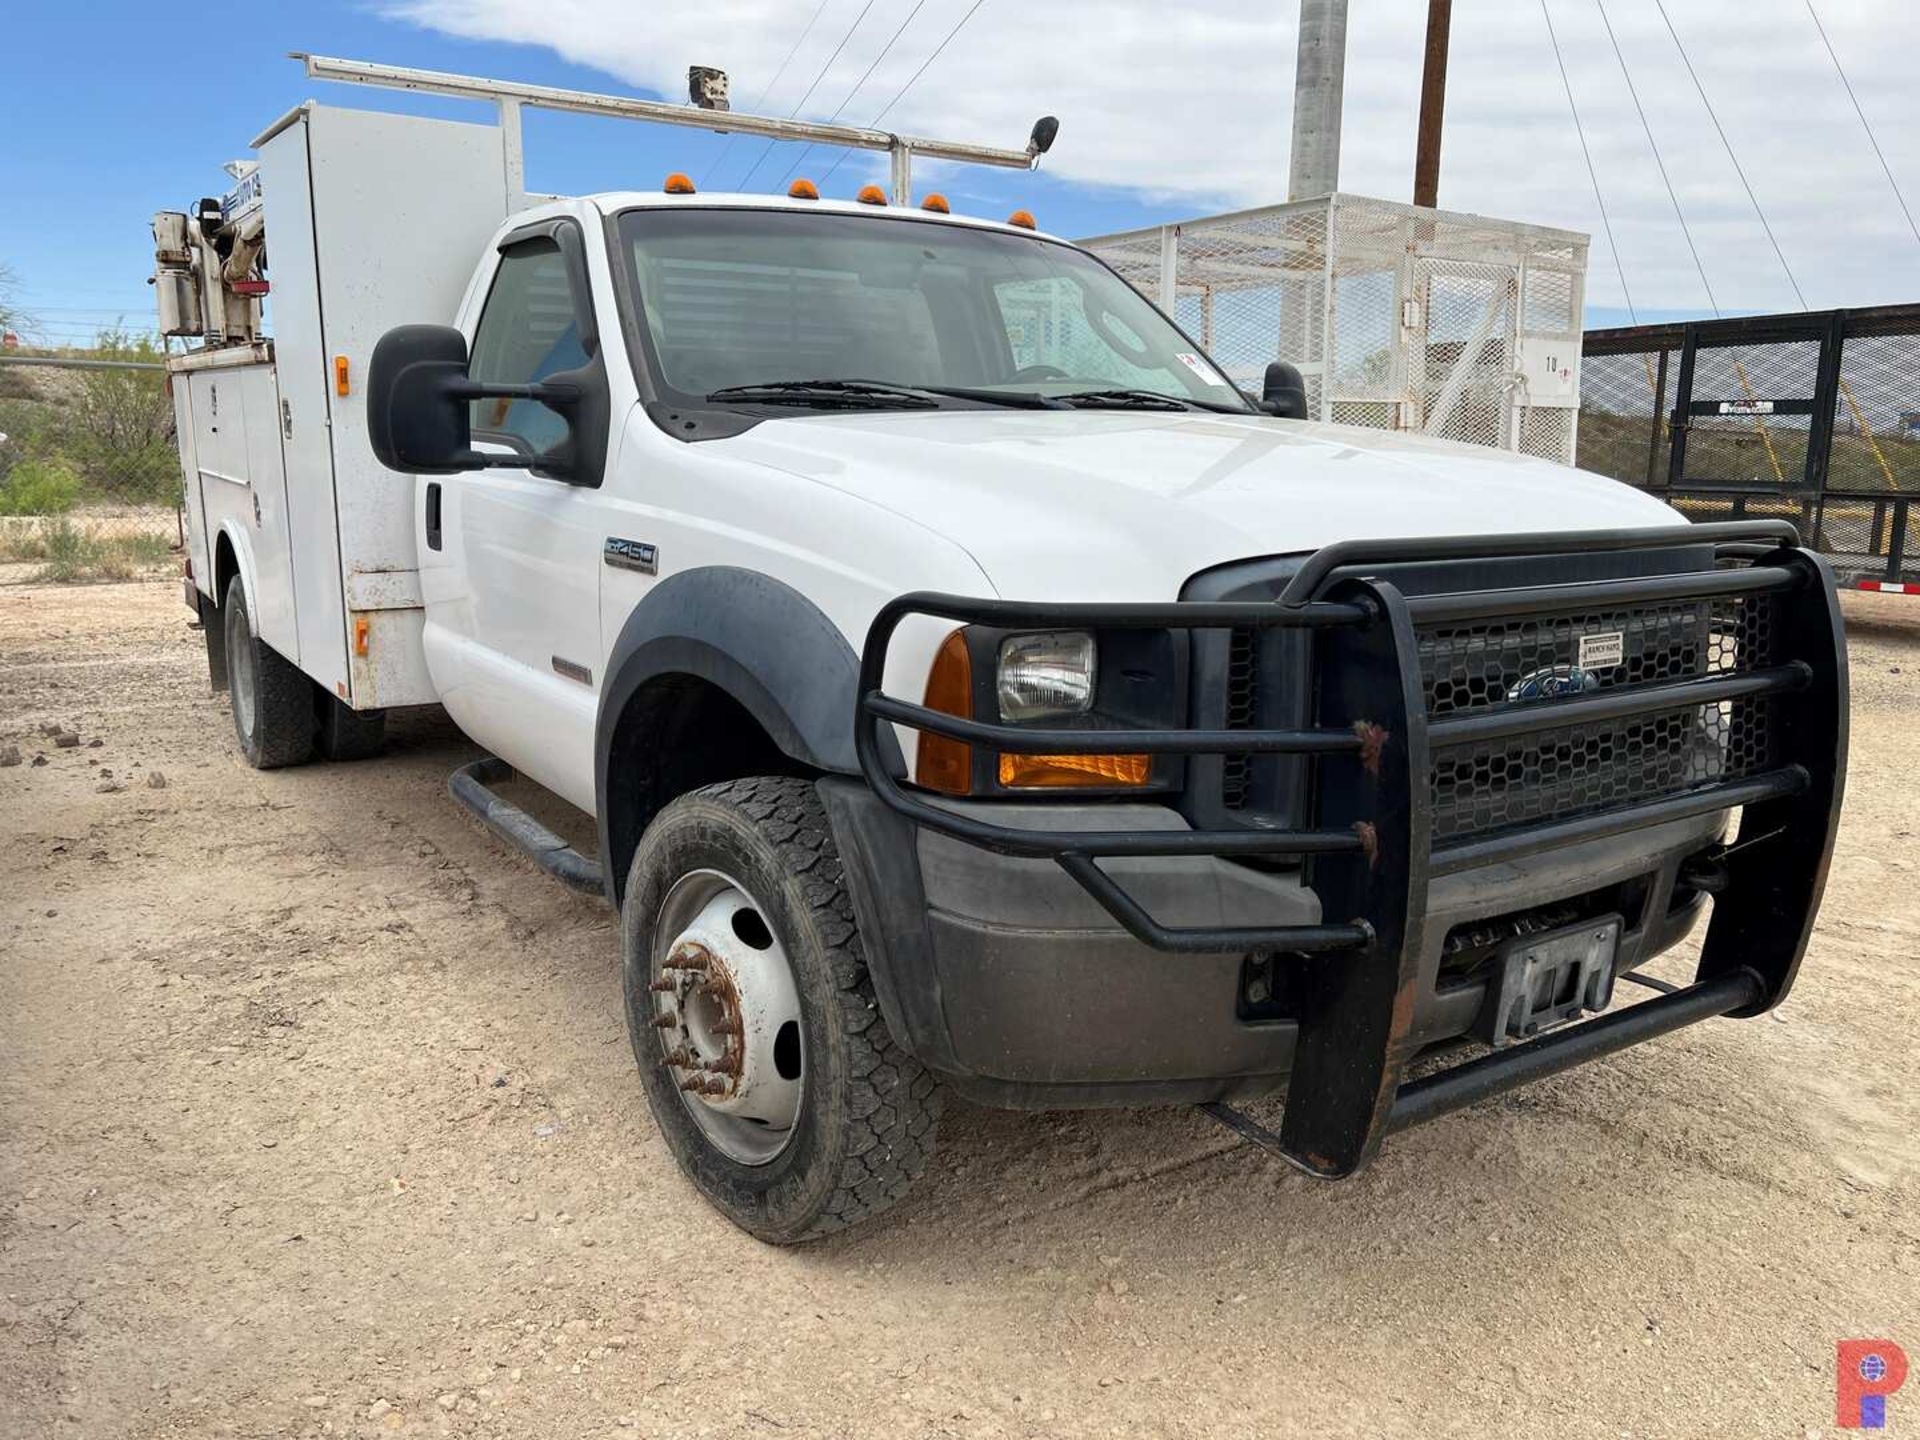 2006 FORD F450 SERVICE TRUCK - Image 2 of 27